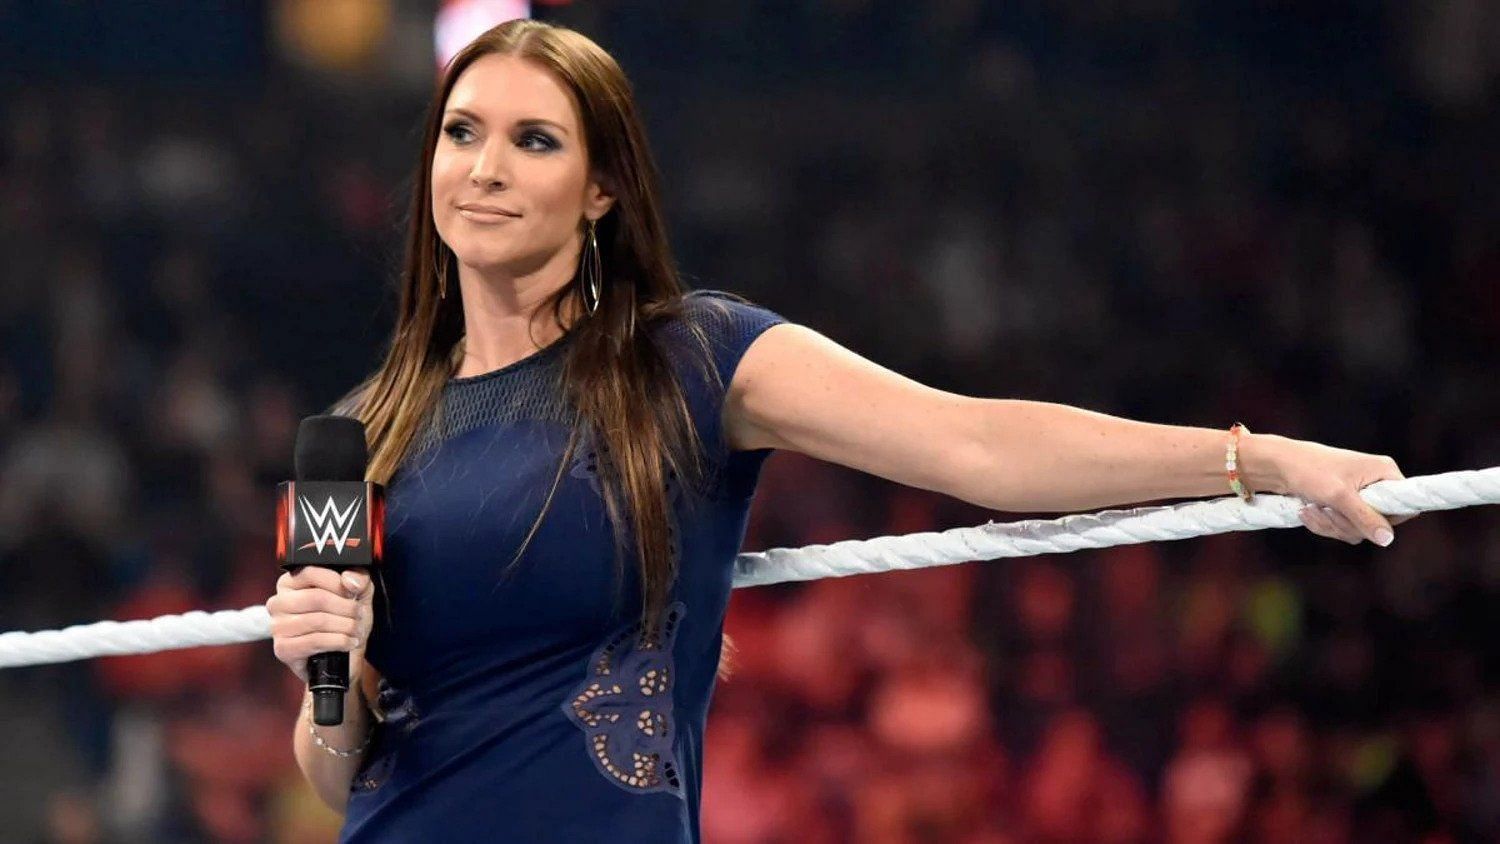 Stephanie McMahon announced her resignation from WWE earlier this year!